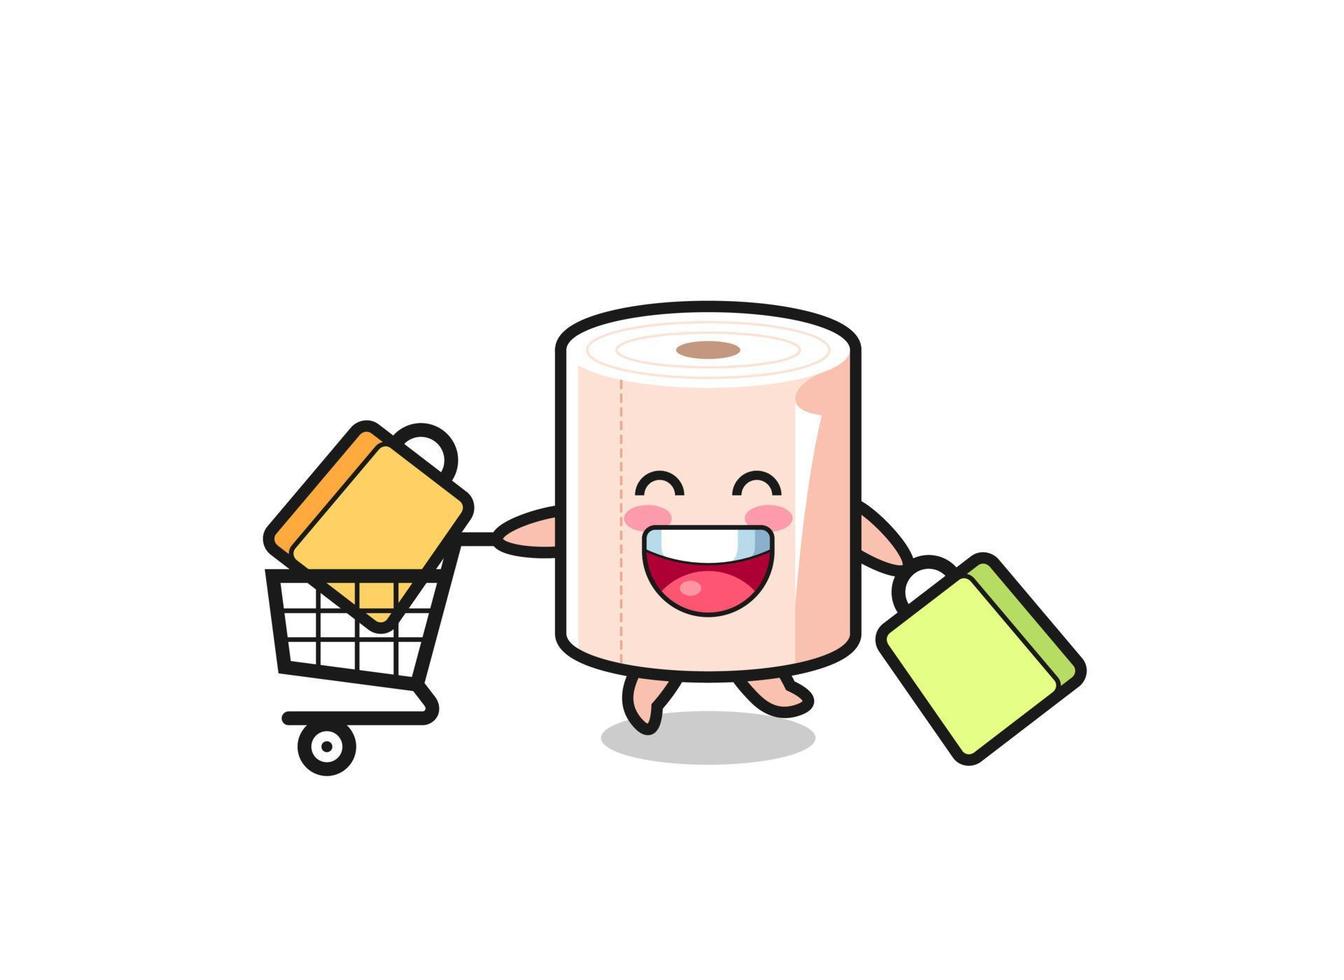 black Friday illustration with cute tissue roll mascot vector